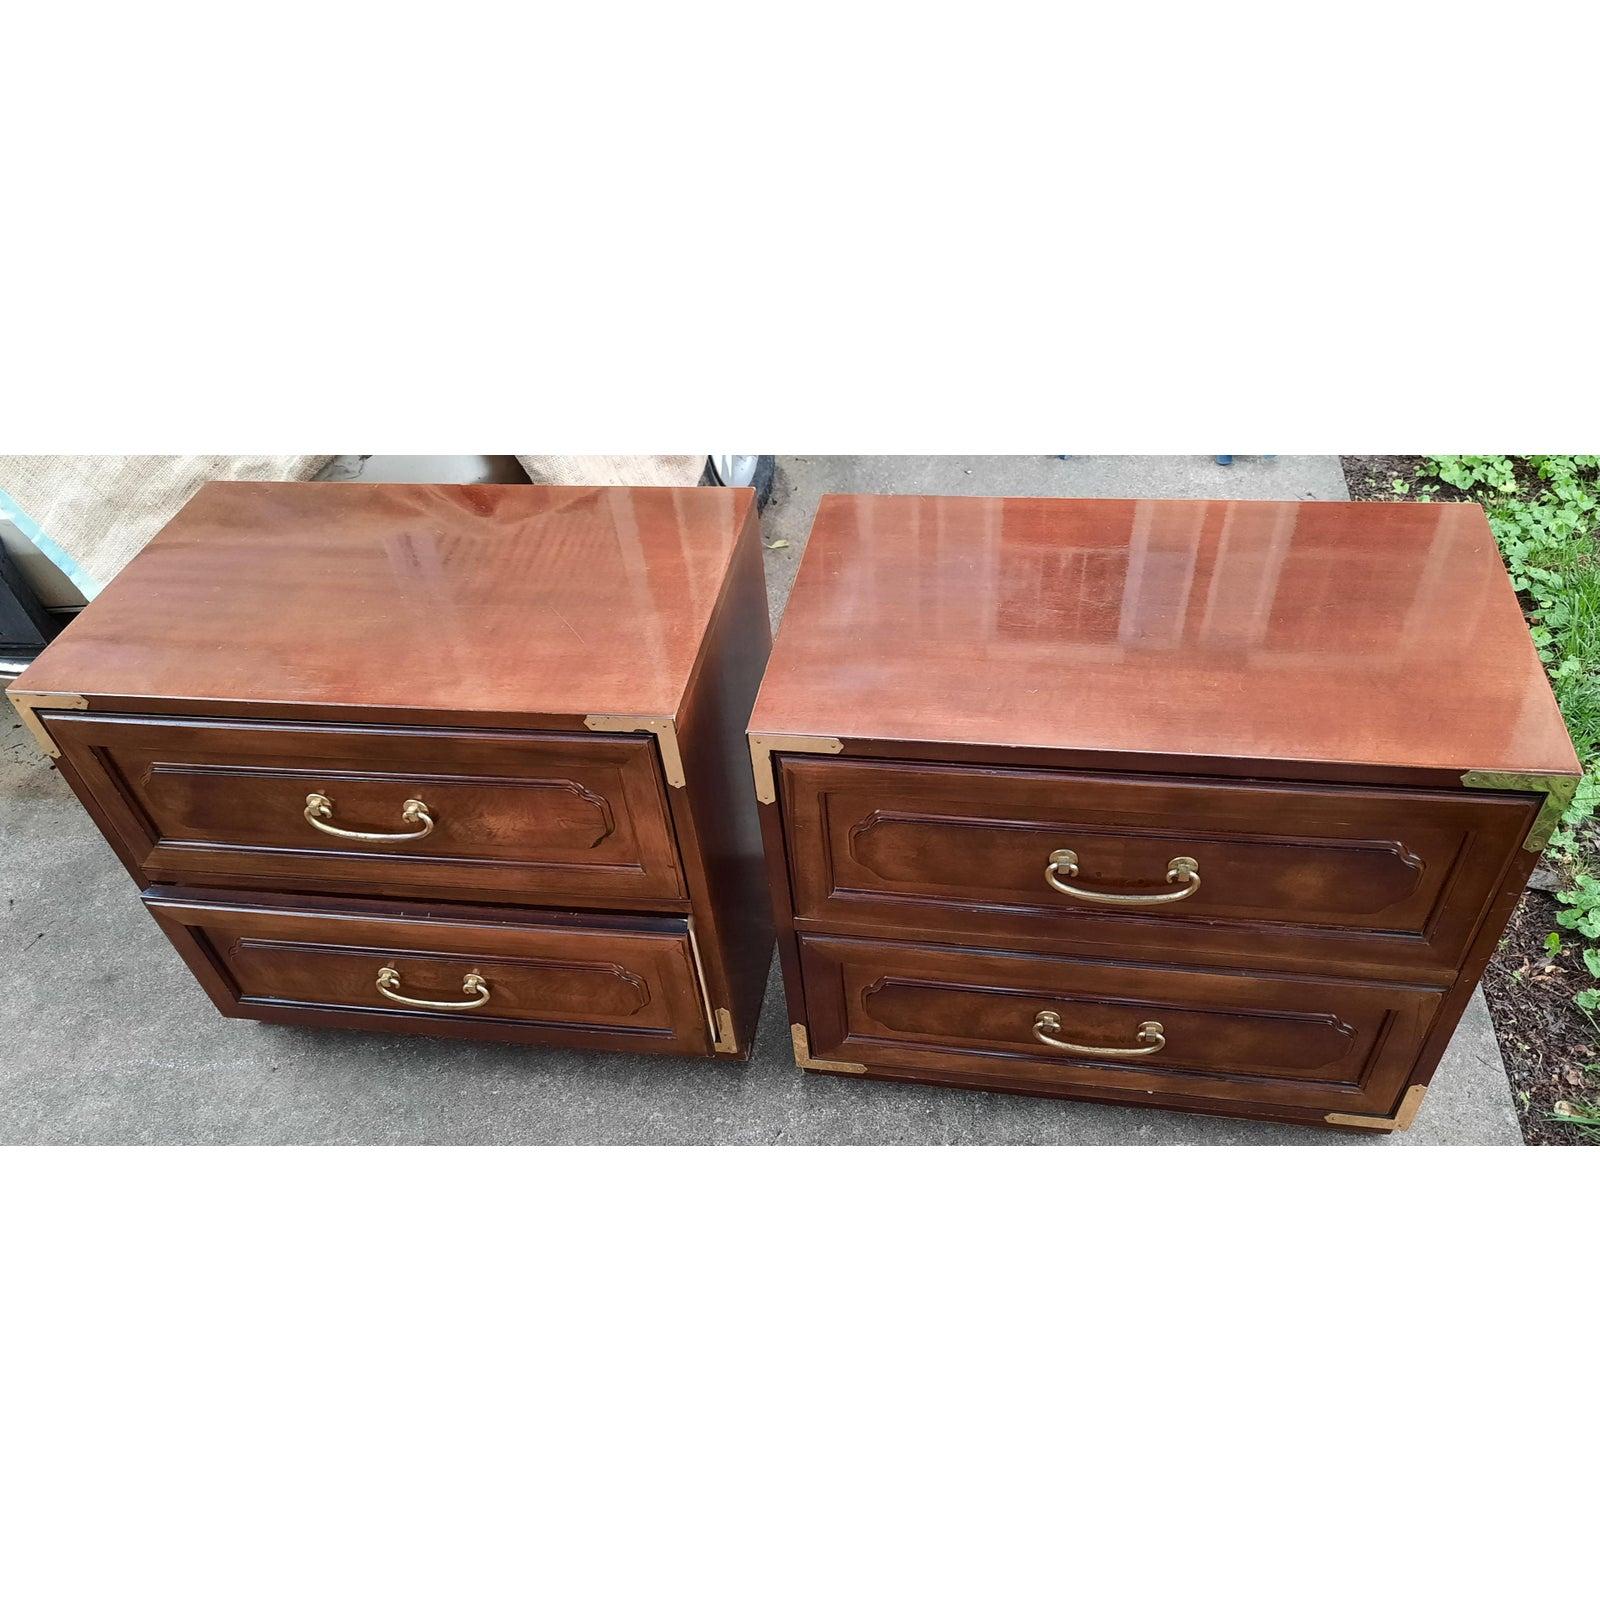 Brass Bernhardt Asian American Campaign Mahogany Burl Nightstands, a Pair For Sale